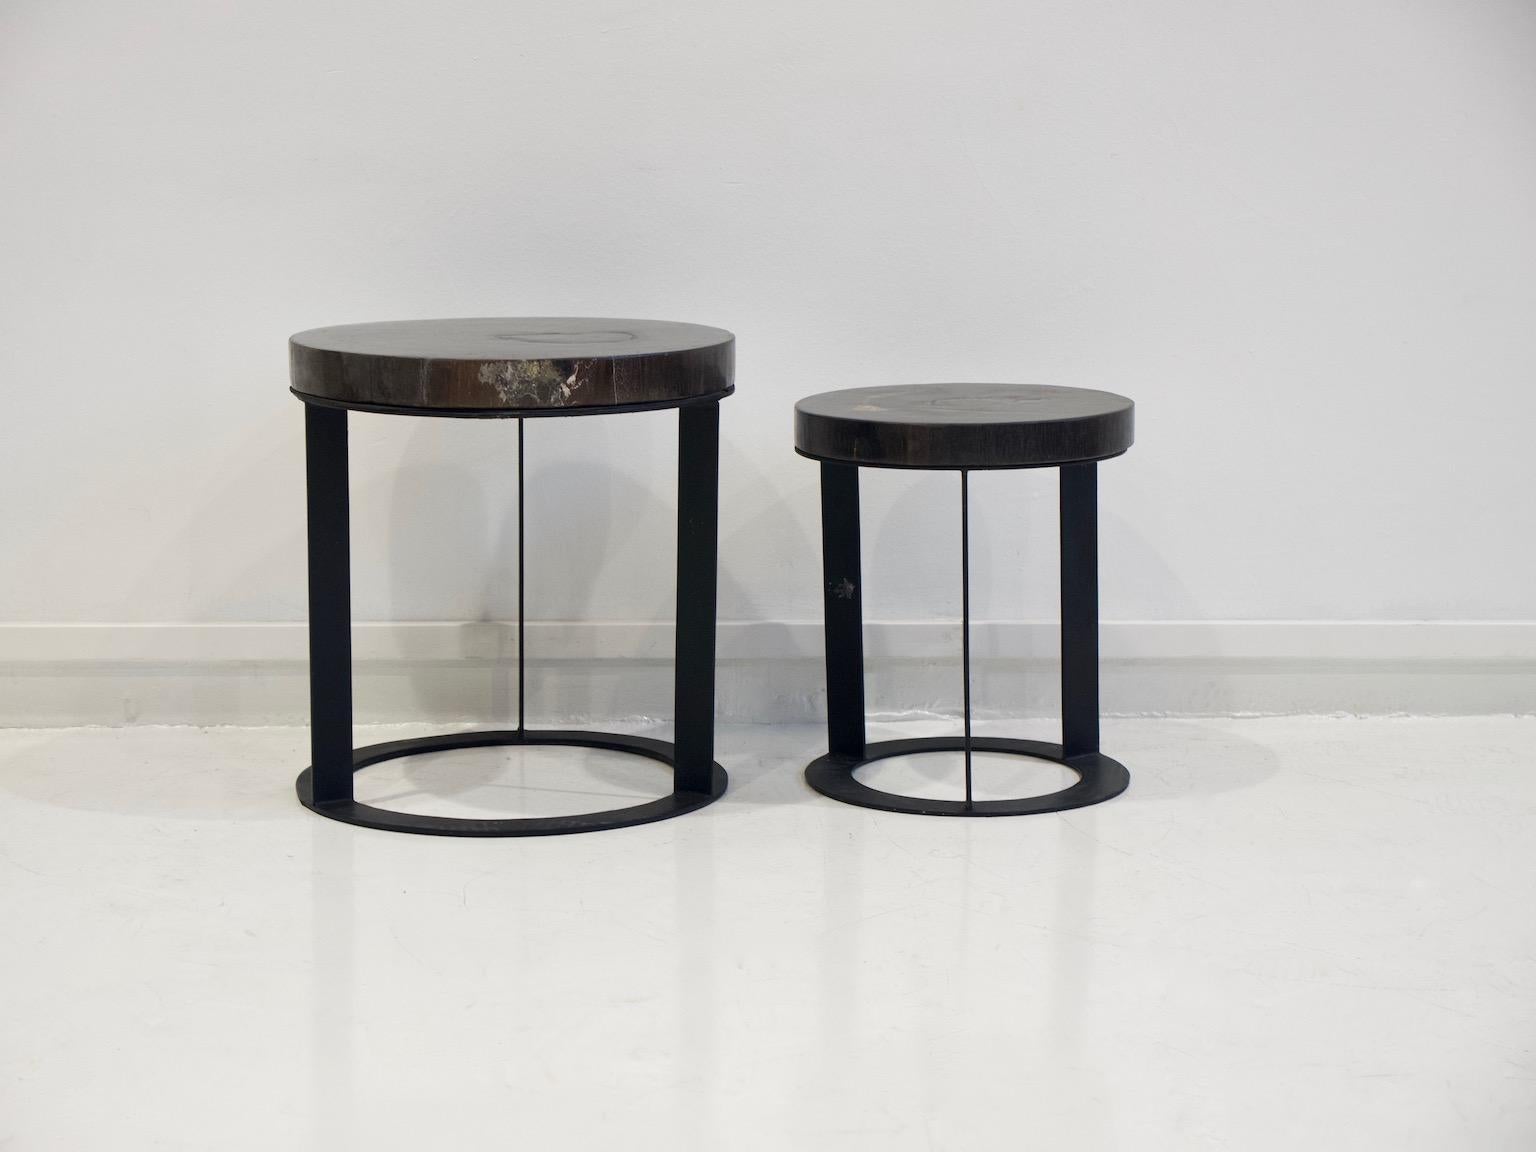 Set of two side tables with round black metal base and dark petrified wood top. Large measures: height 46.5 cm, diameter 44.5 cm. Small: height 40 cm, diameter 34 cm.